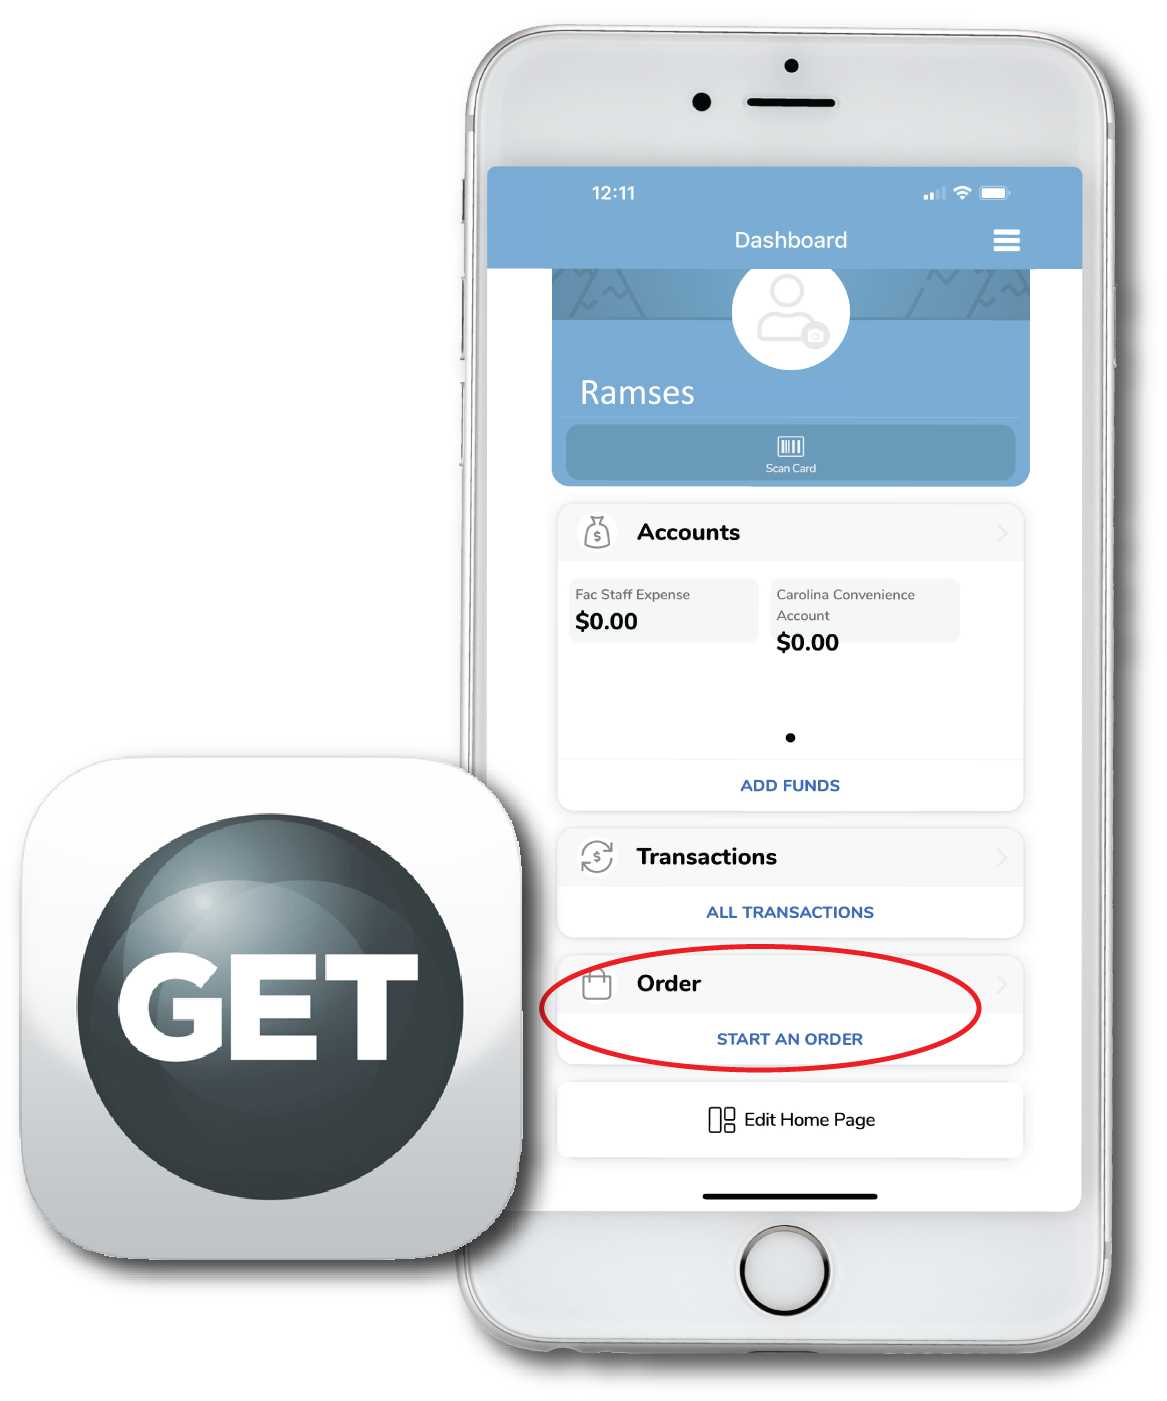 The GET logo on top of a cut out of an iPhone with the GET mobile app on the screen with a red circle around the ordering section.